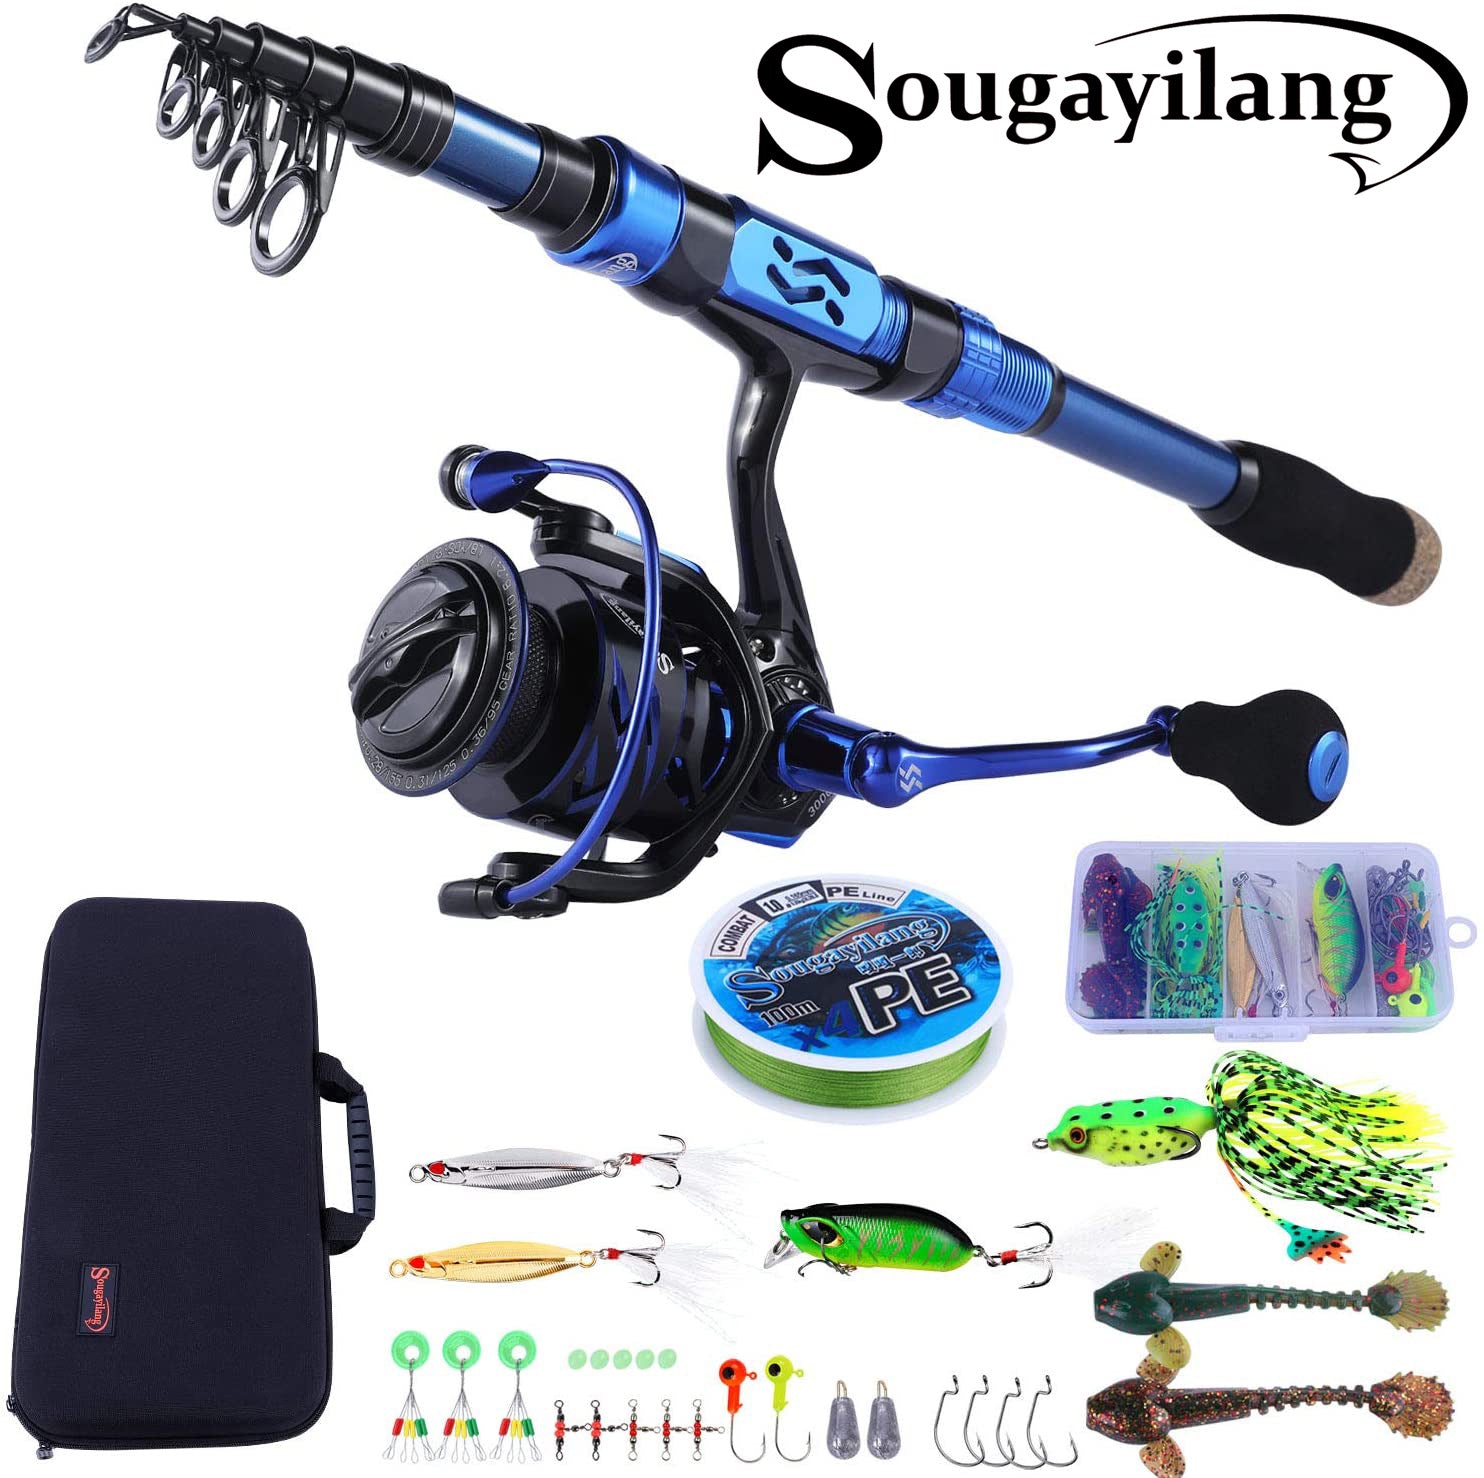 Sougayilang Carp Collapsible Fishing Pole Reel Combo With Power Feeder And  Spinning, Free 500m Nylon Line Full Kit L/M/H Pesca 230609 From Ren05,  $49.94